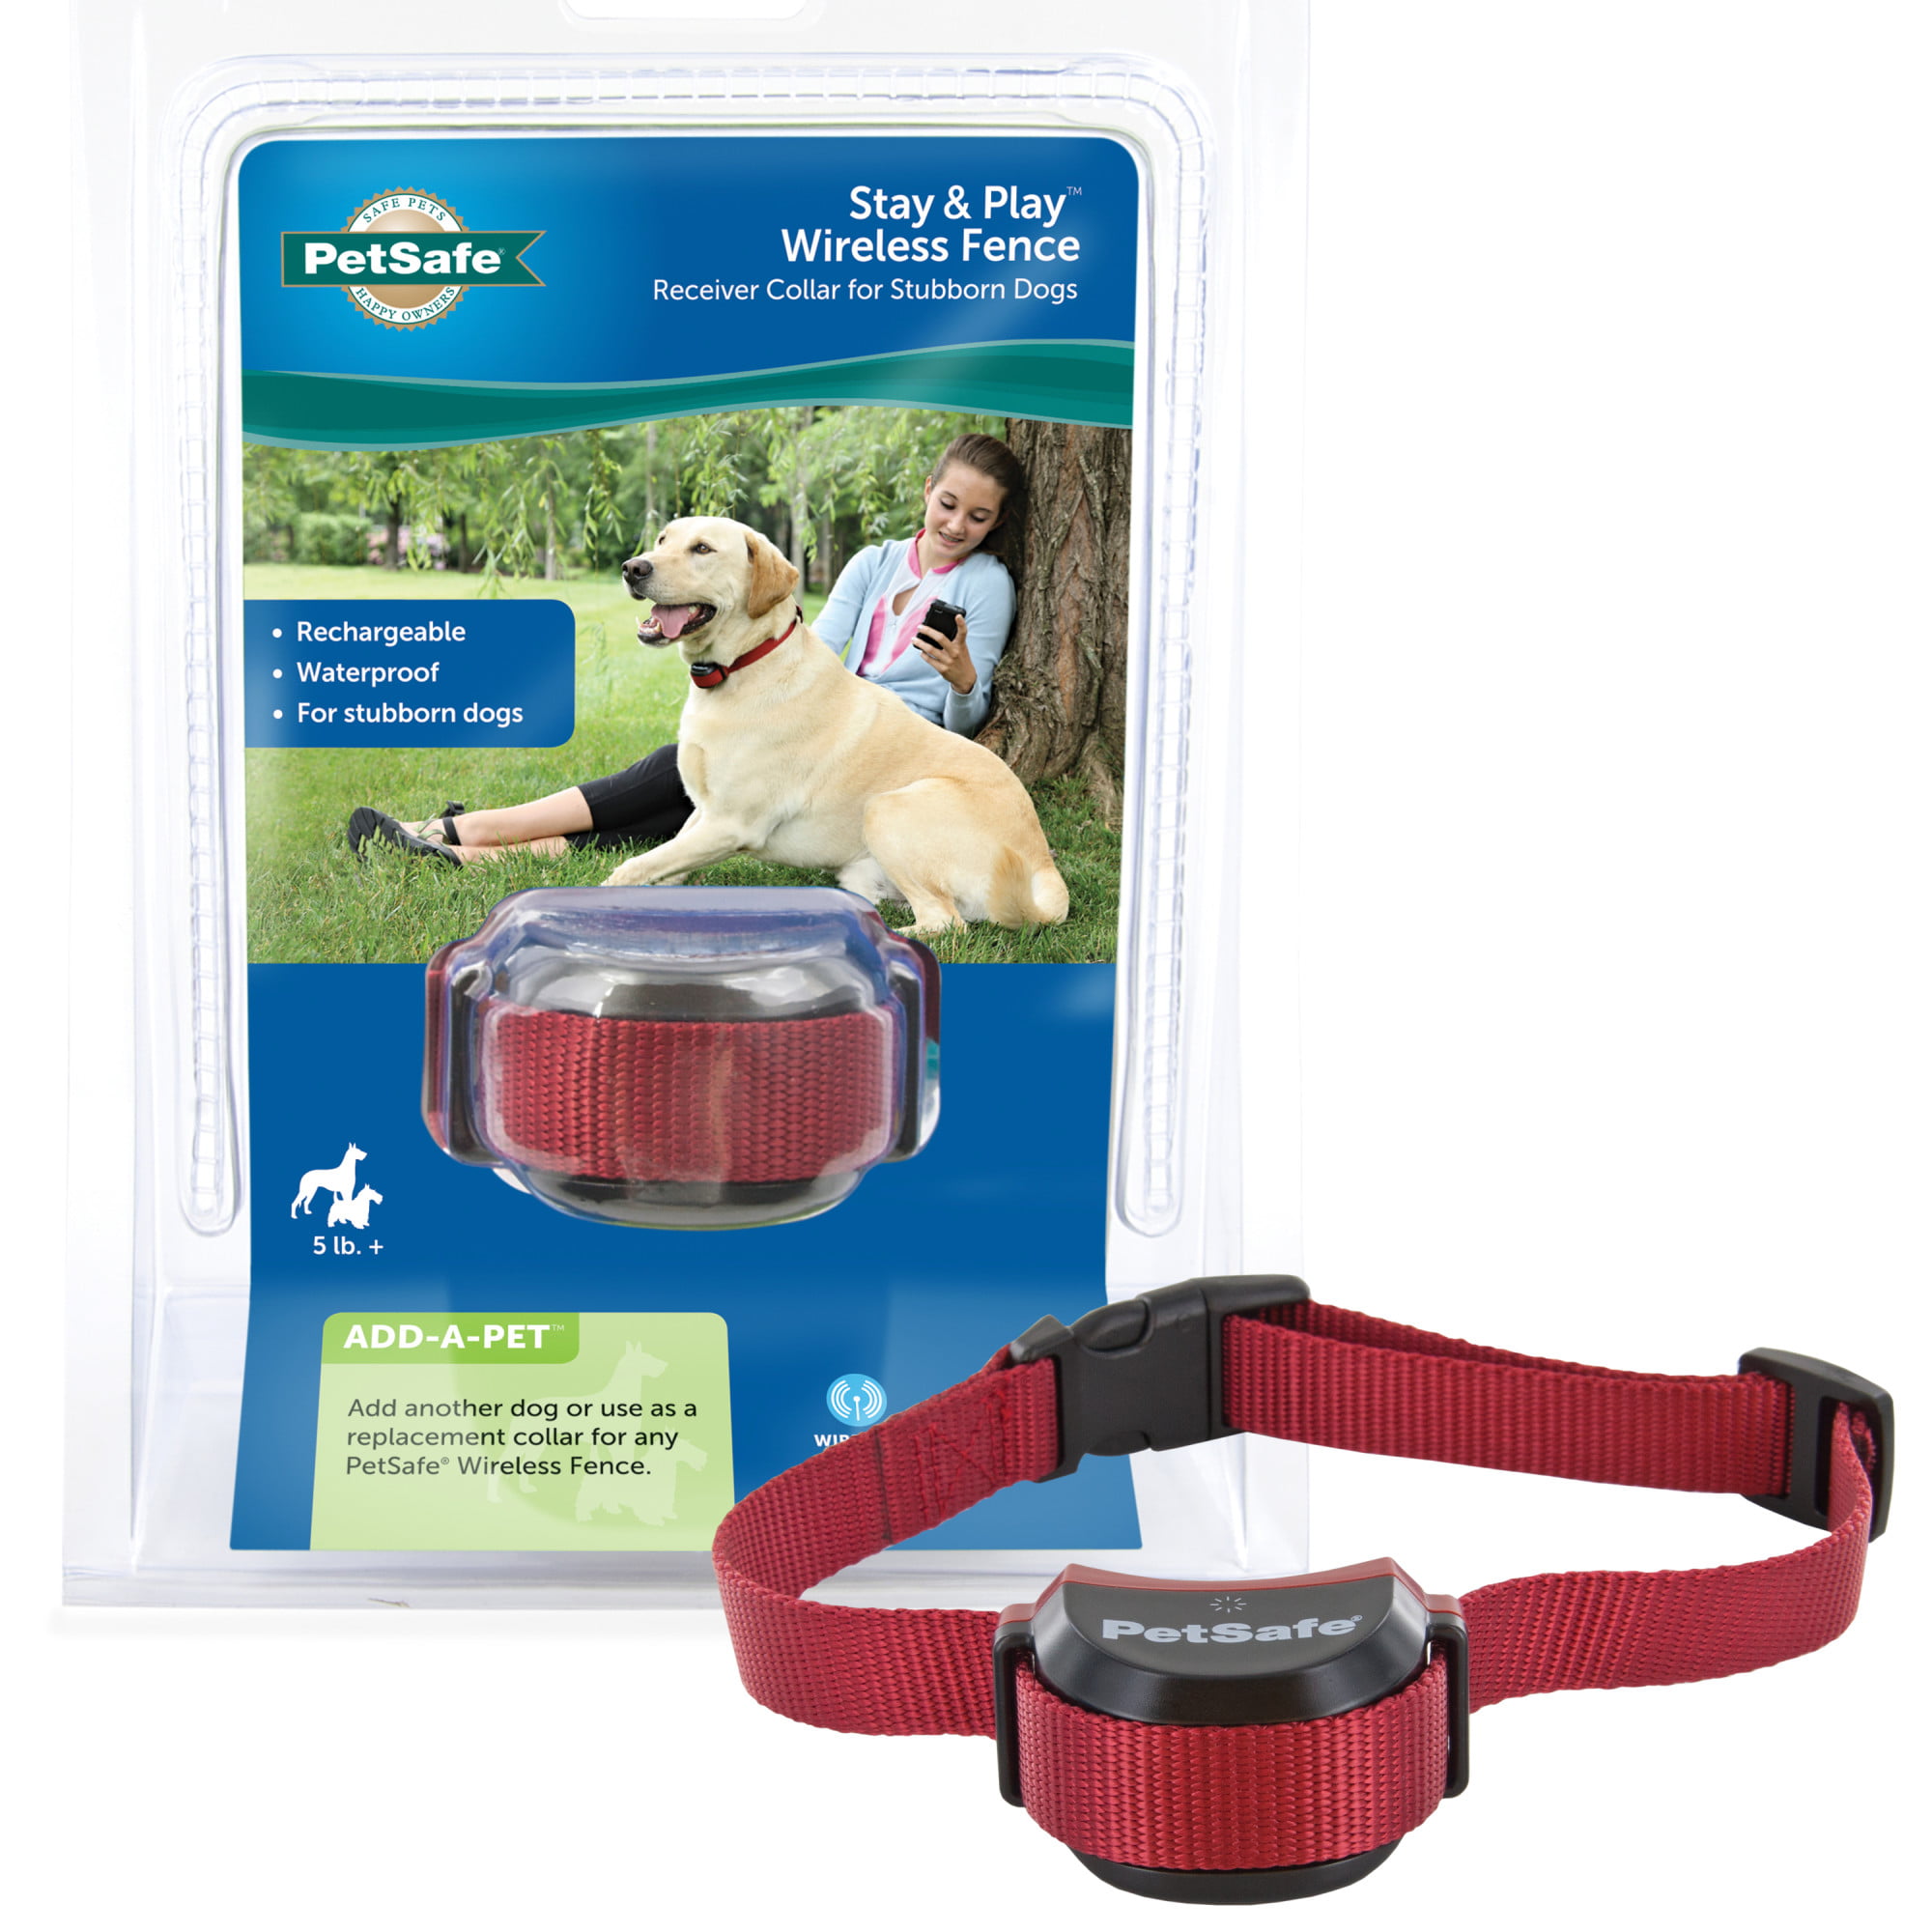 Play Wireless Fence Receiver Collar 